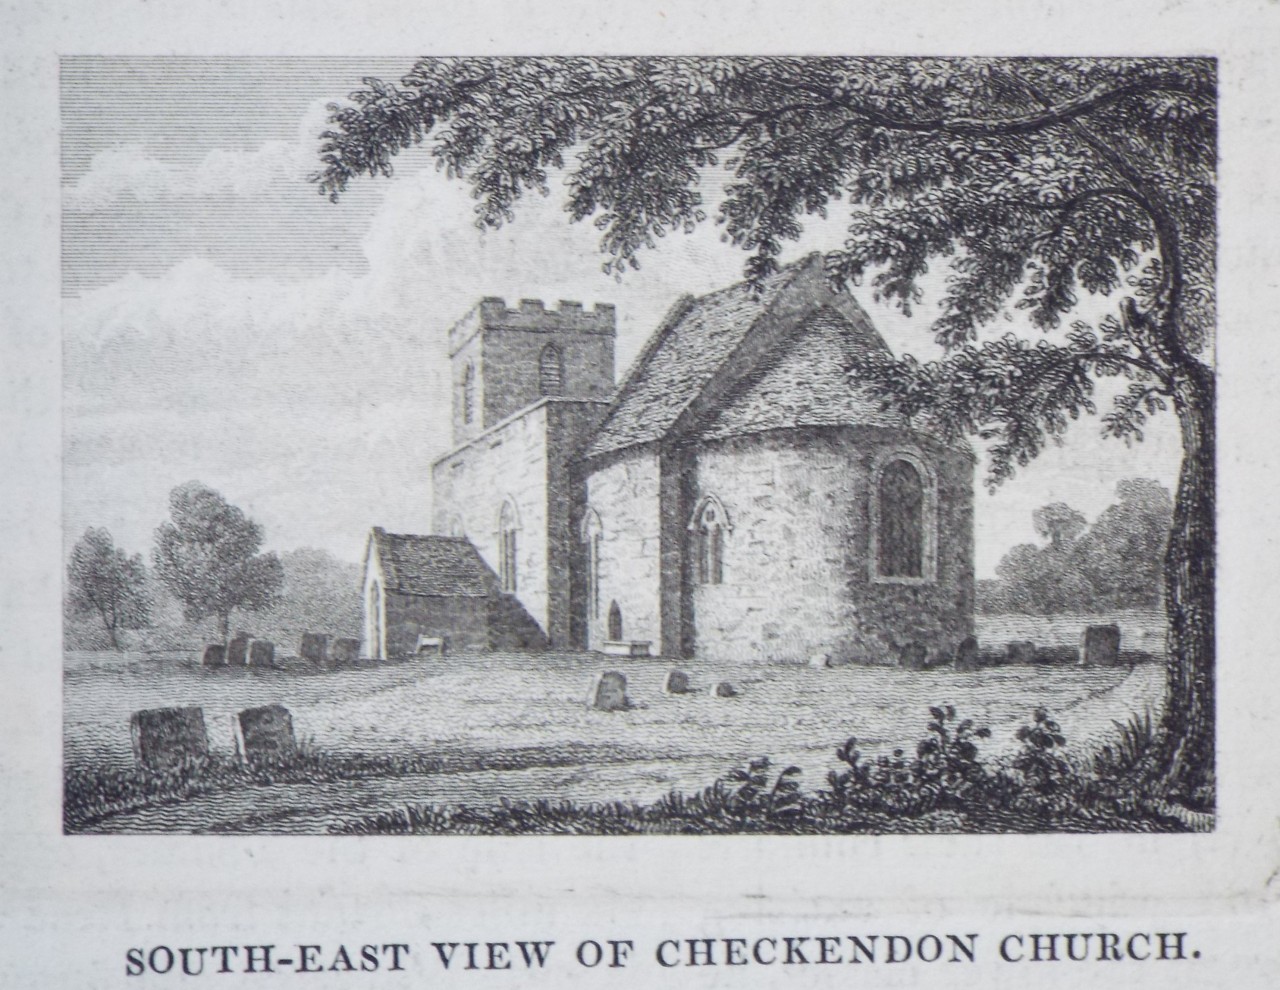 Print - South-east View of Checkendon Church.